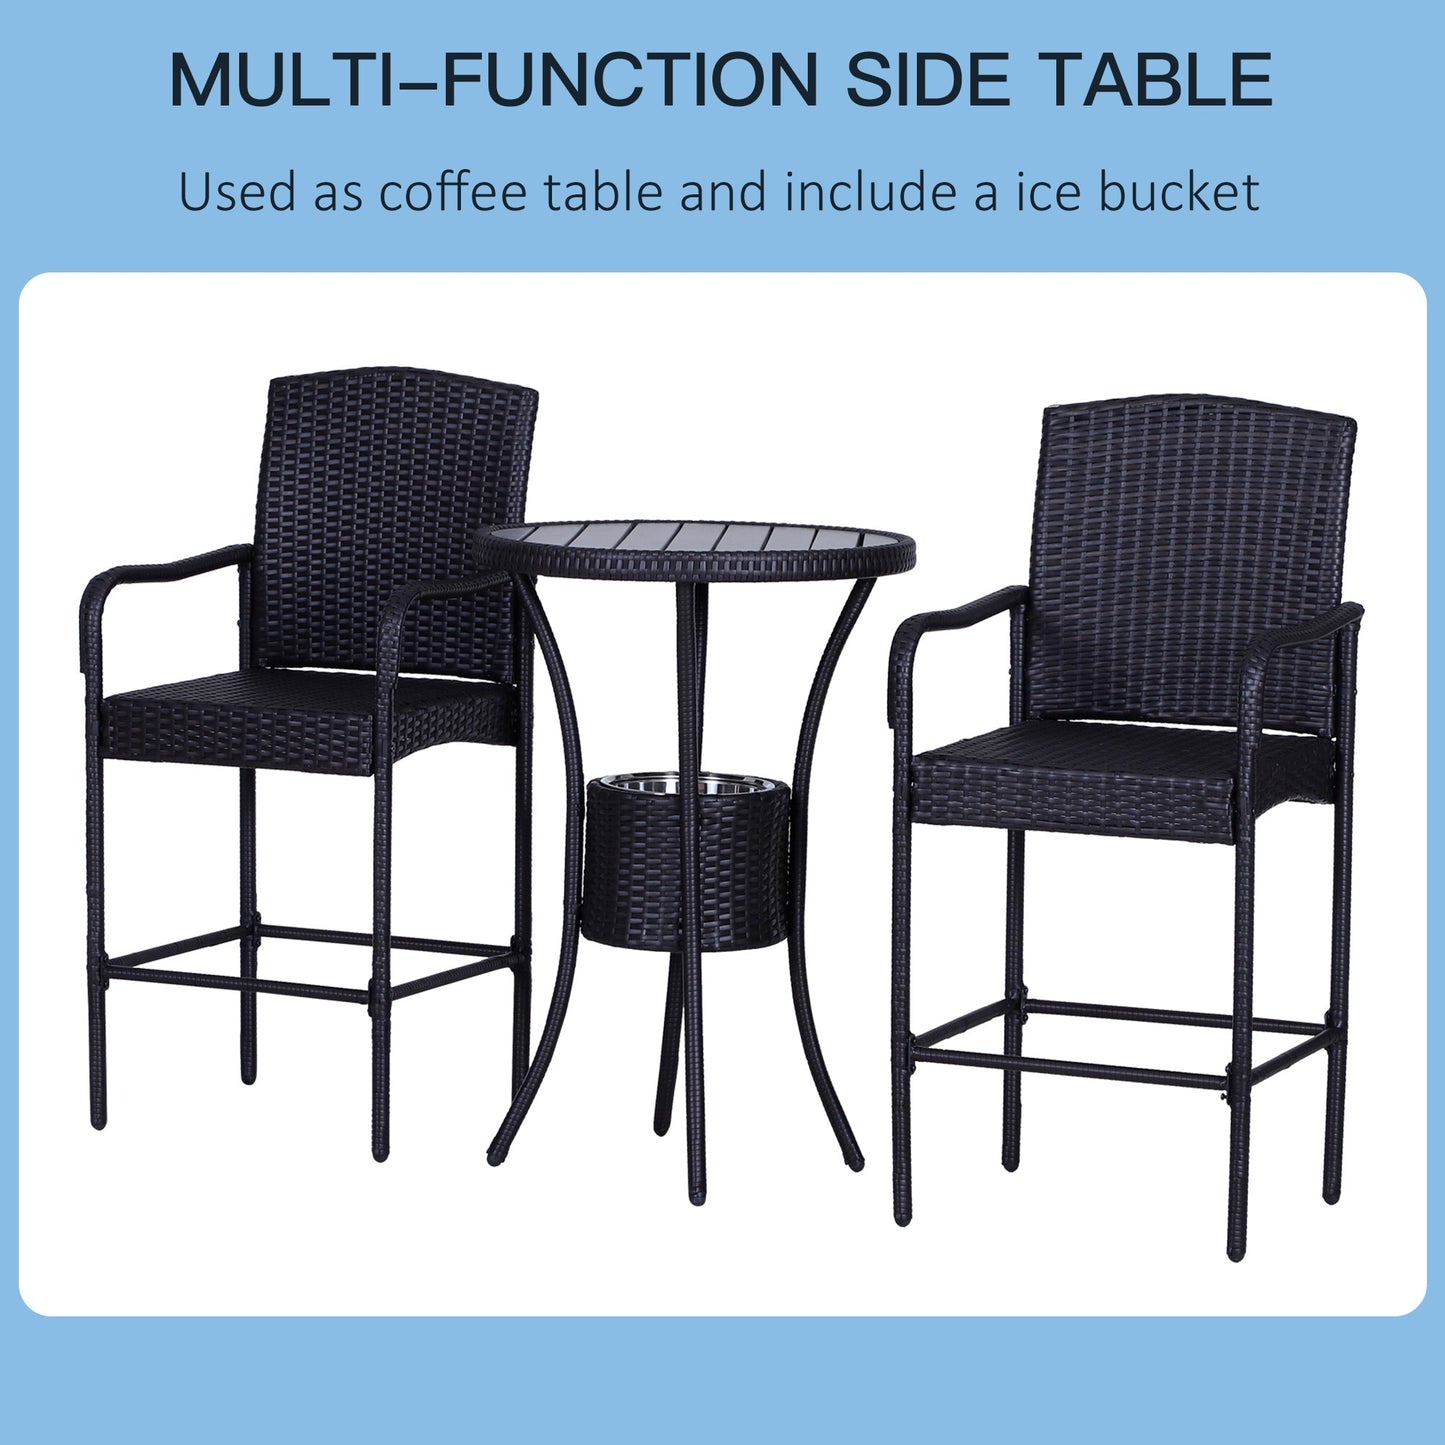 Outdoor and Garden-Rattan Wicker Bar Set for 3 PCS with Ice Buckets, Patio Furniture with 1 Bar Table and 2 Bar Stools for Poolside, Backyard, Porches - Outdoor Style Company